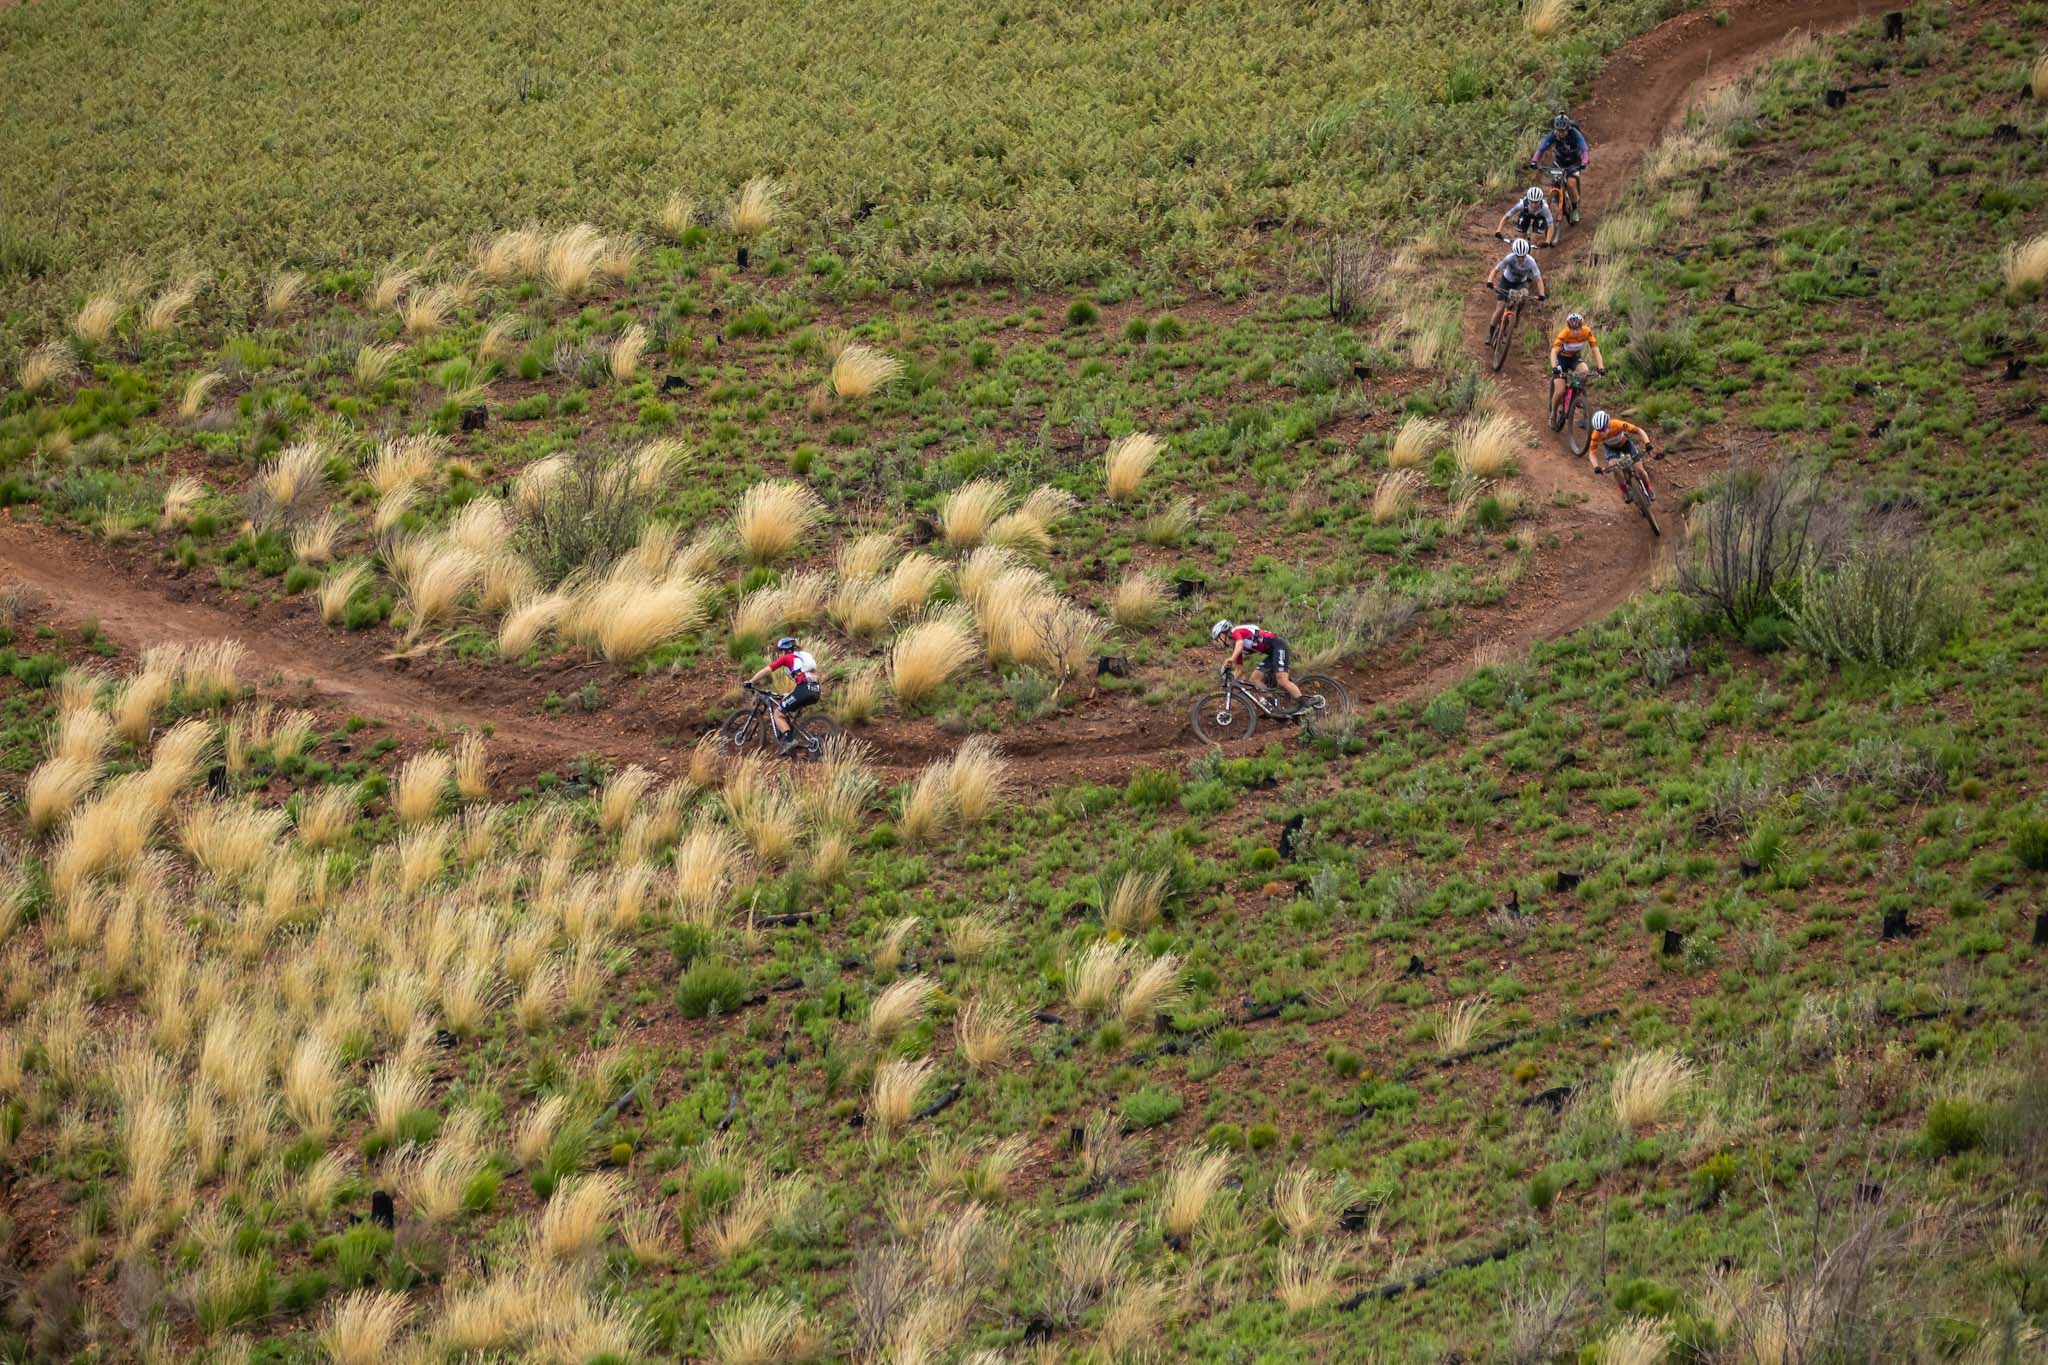 Photo by Dom Barnardt / Cape Epic